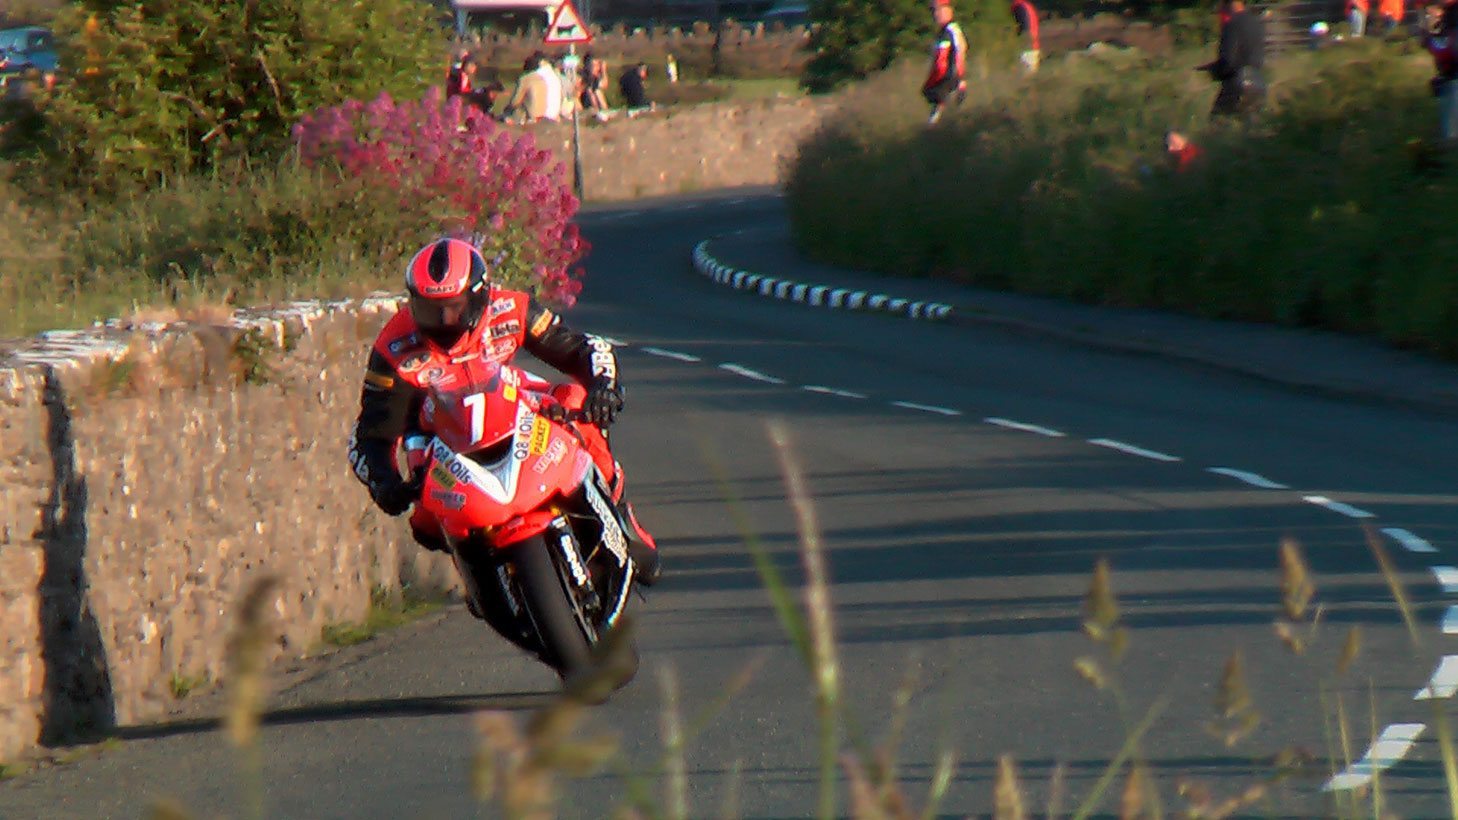 Motorbike during the Isle of Man TT 2008 - photo by Jonathan Camp